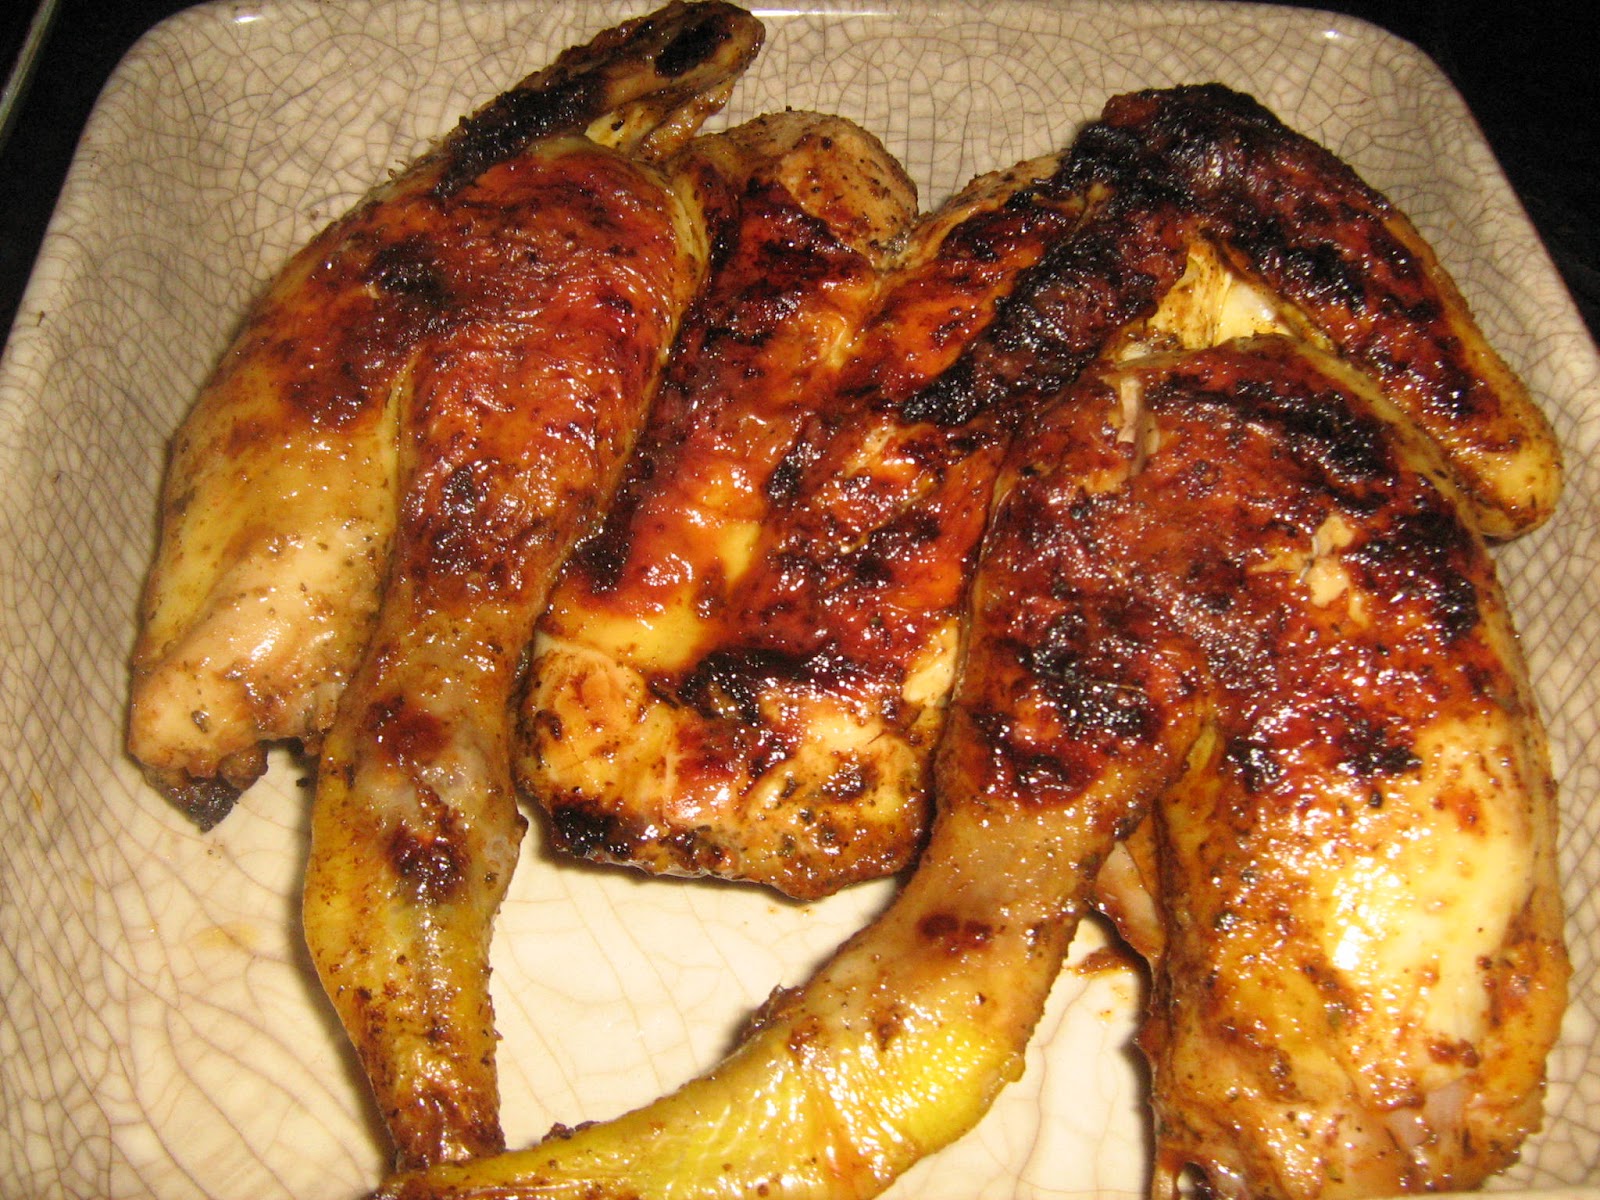 LAM BASSA'A: POULET GRILLE AUX VIN ROSE / GRILLED CHICKEN PARFUMED WITH ...